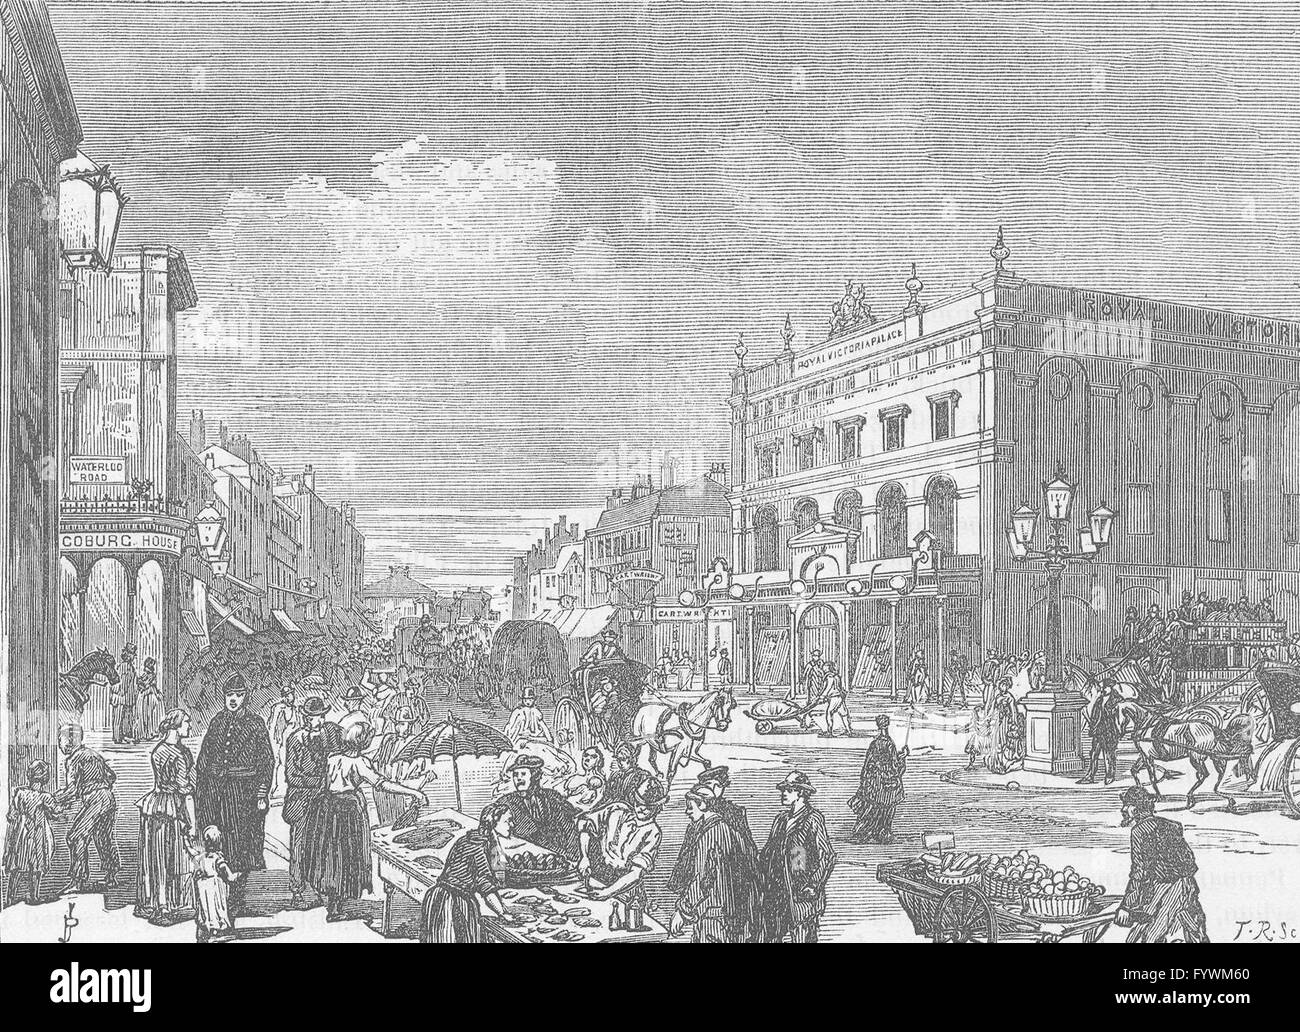 LAMBETH: View in the new cut. London, antique print c1880 Stock Photo